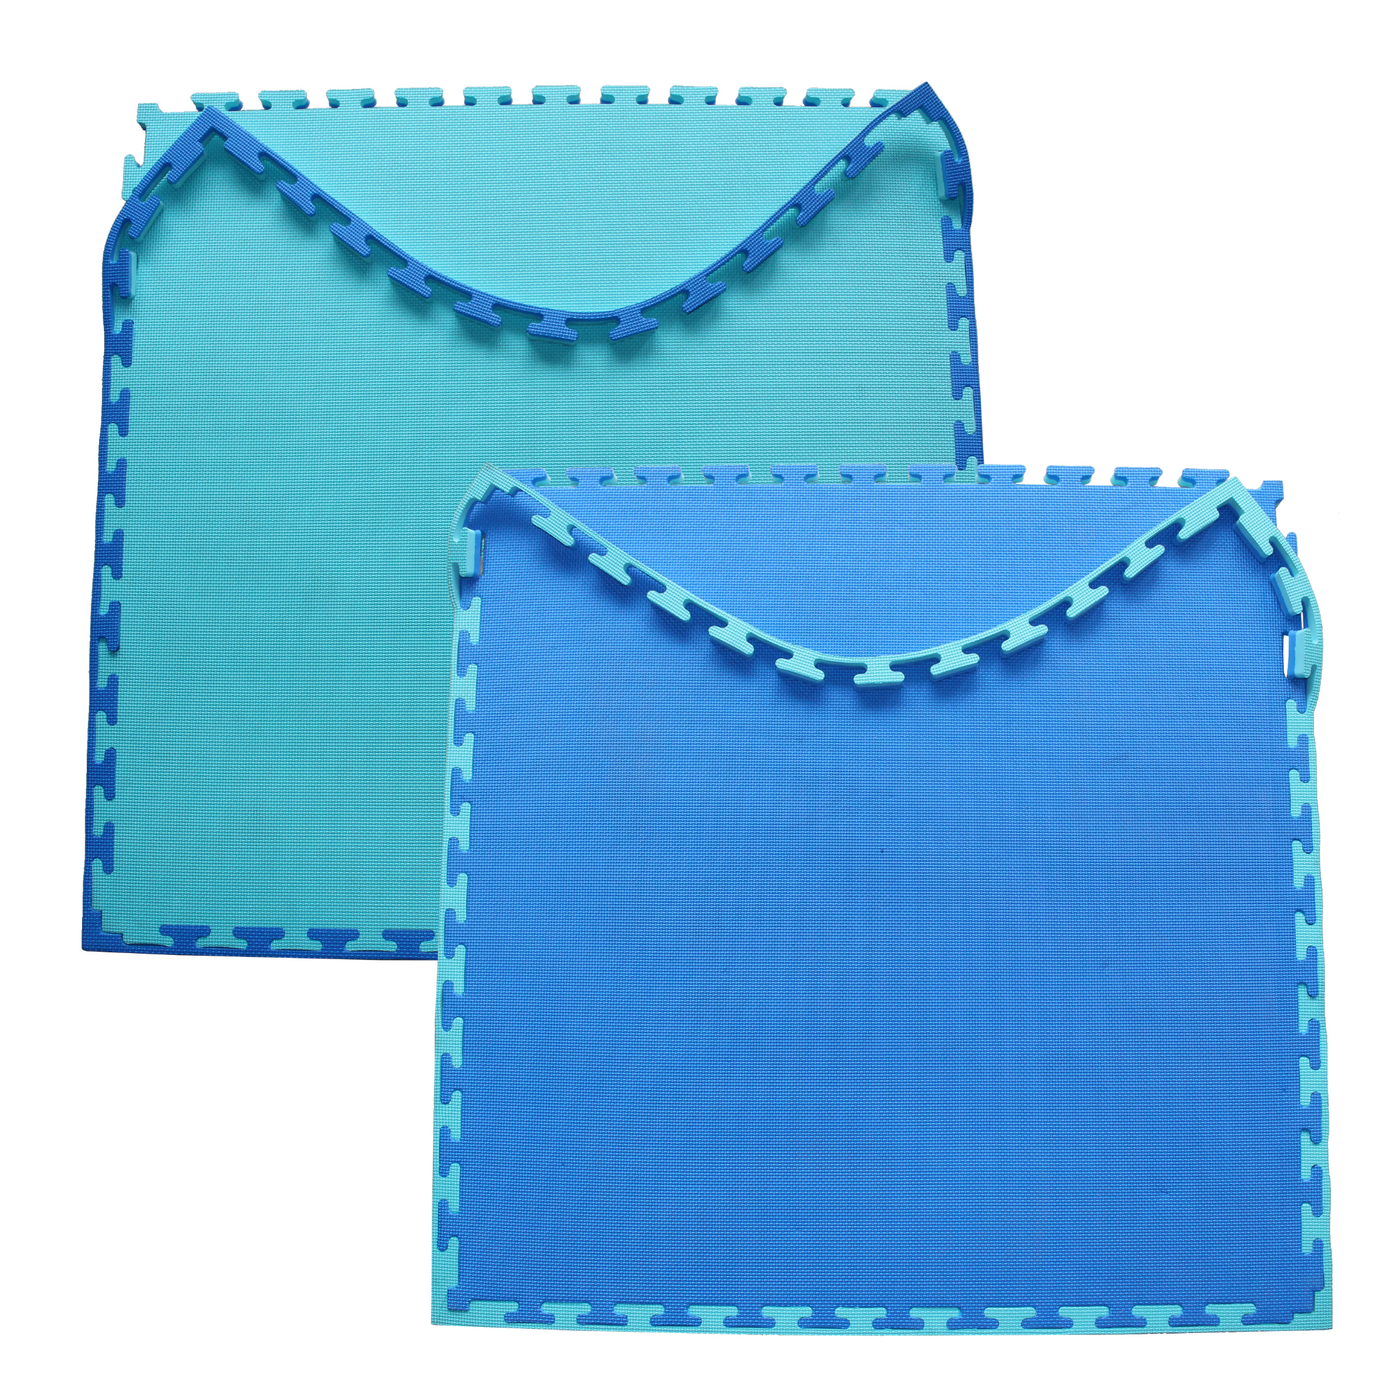 Regent Products 75021 11.5 x 15 in. Flexible Cutting Mats Blue - Pack of 2